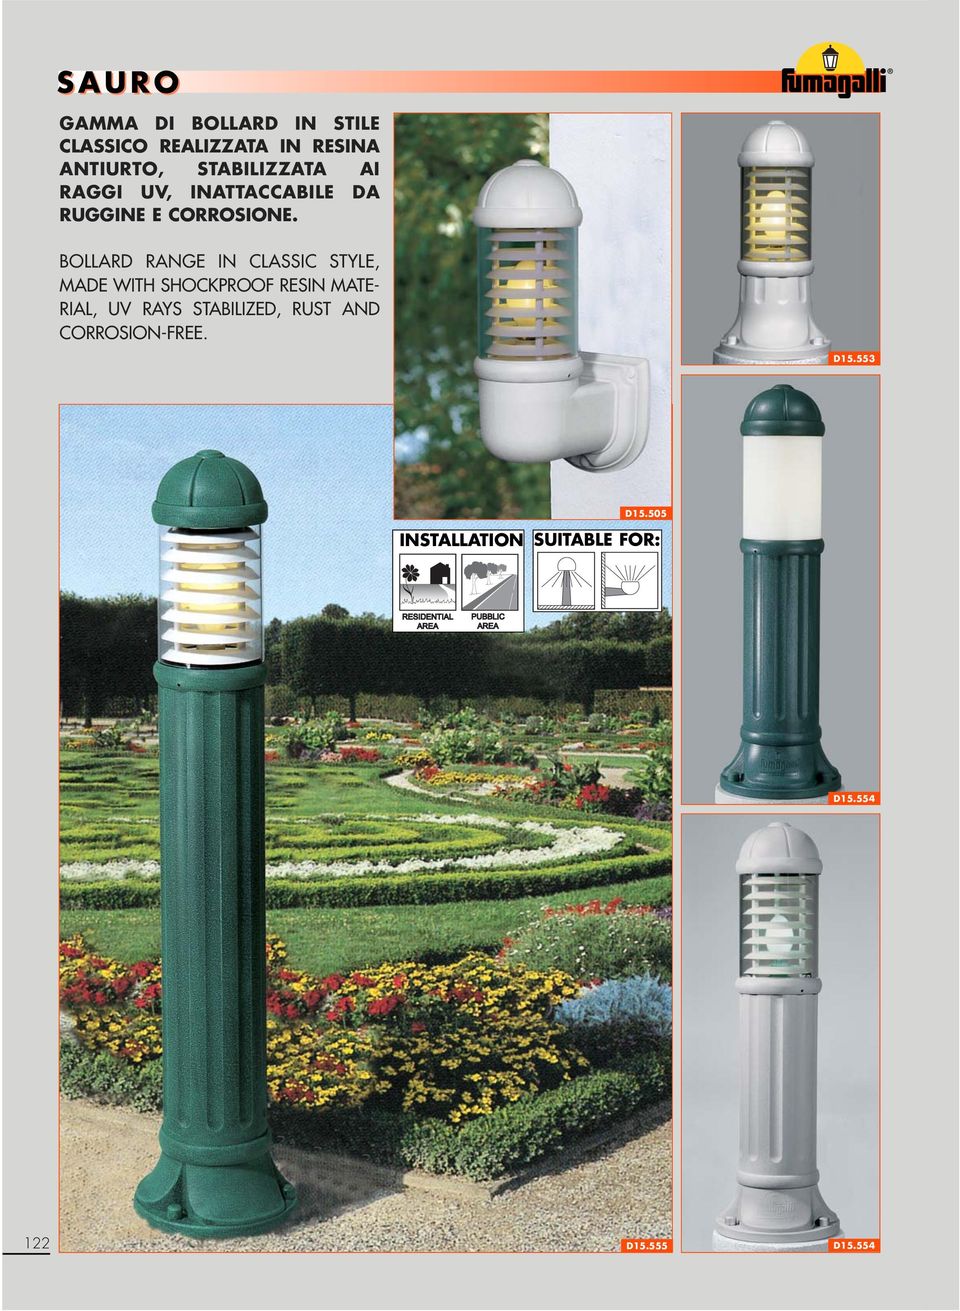 BOLLARD RANGE IN CLASSIC STYLE, MADE WITH SHOCKPROOF RESIN MATE- RIAL, UV RAYS